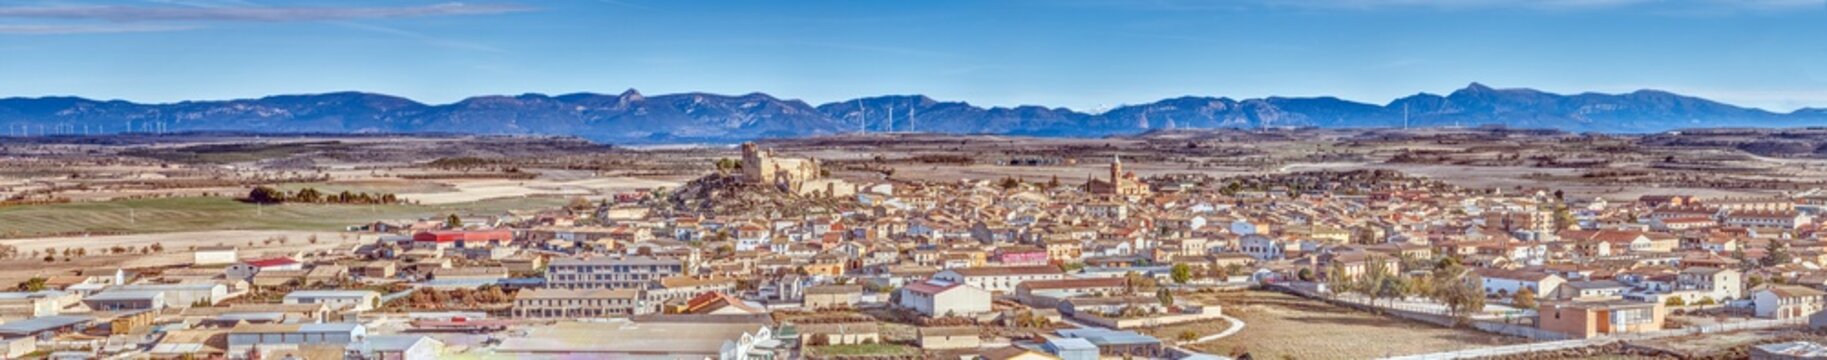 Drone panorama of the village of Almudevar in northern Spain with the Pyrenees in the background